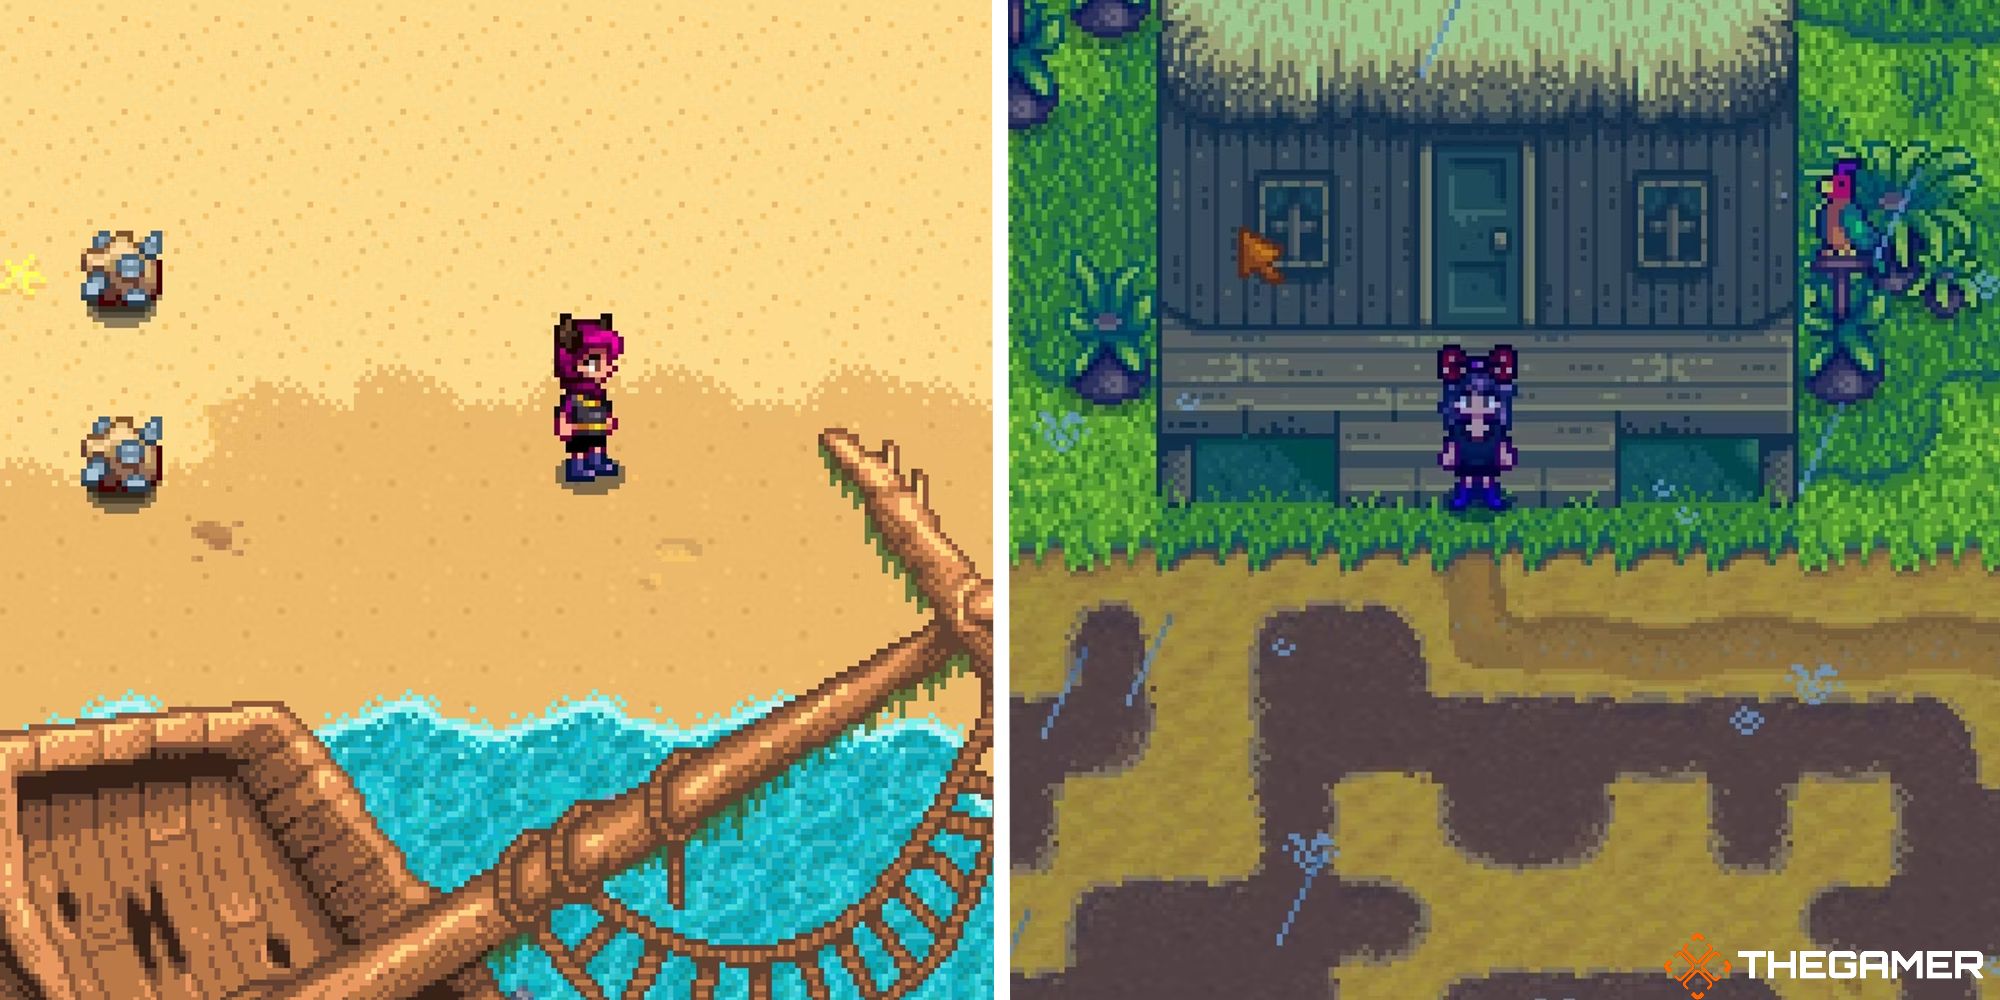 stardew valley split image showing player on beach near shipwreck next to image of player in front of farmhouse